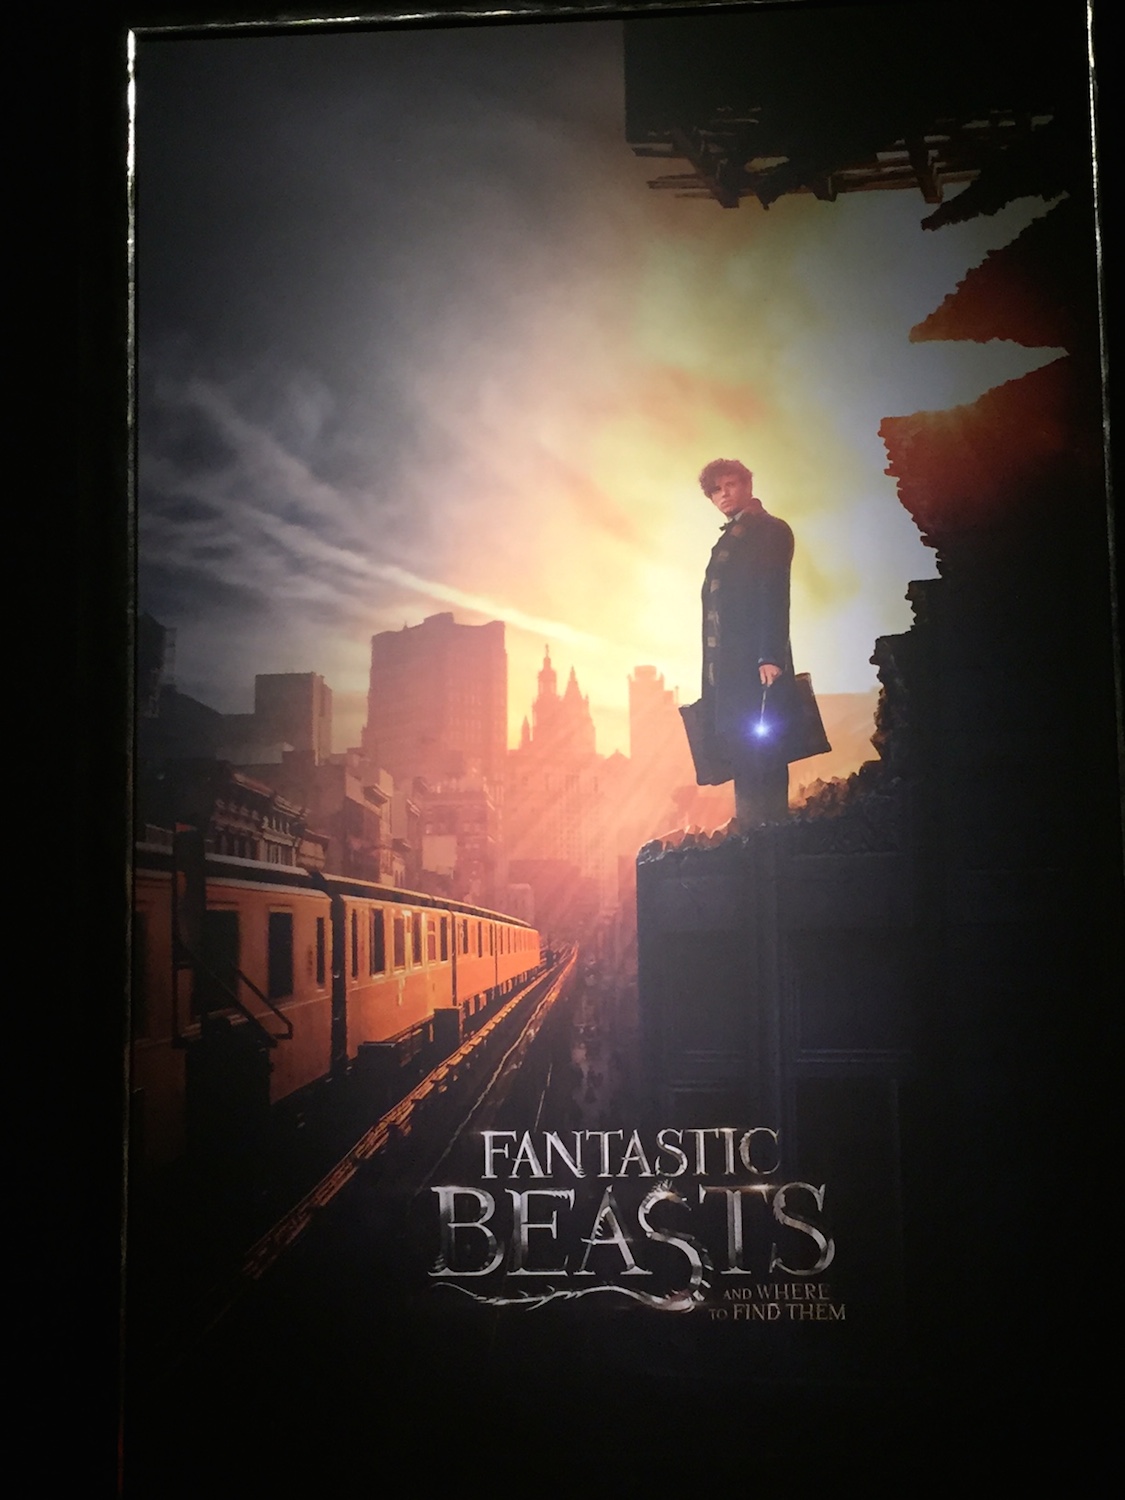 Poster from “Fantastic Beasts and Where to Find Them”